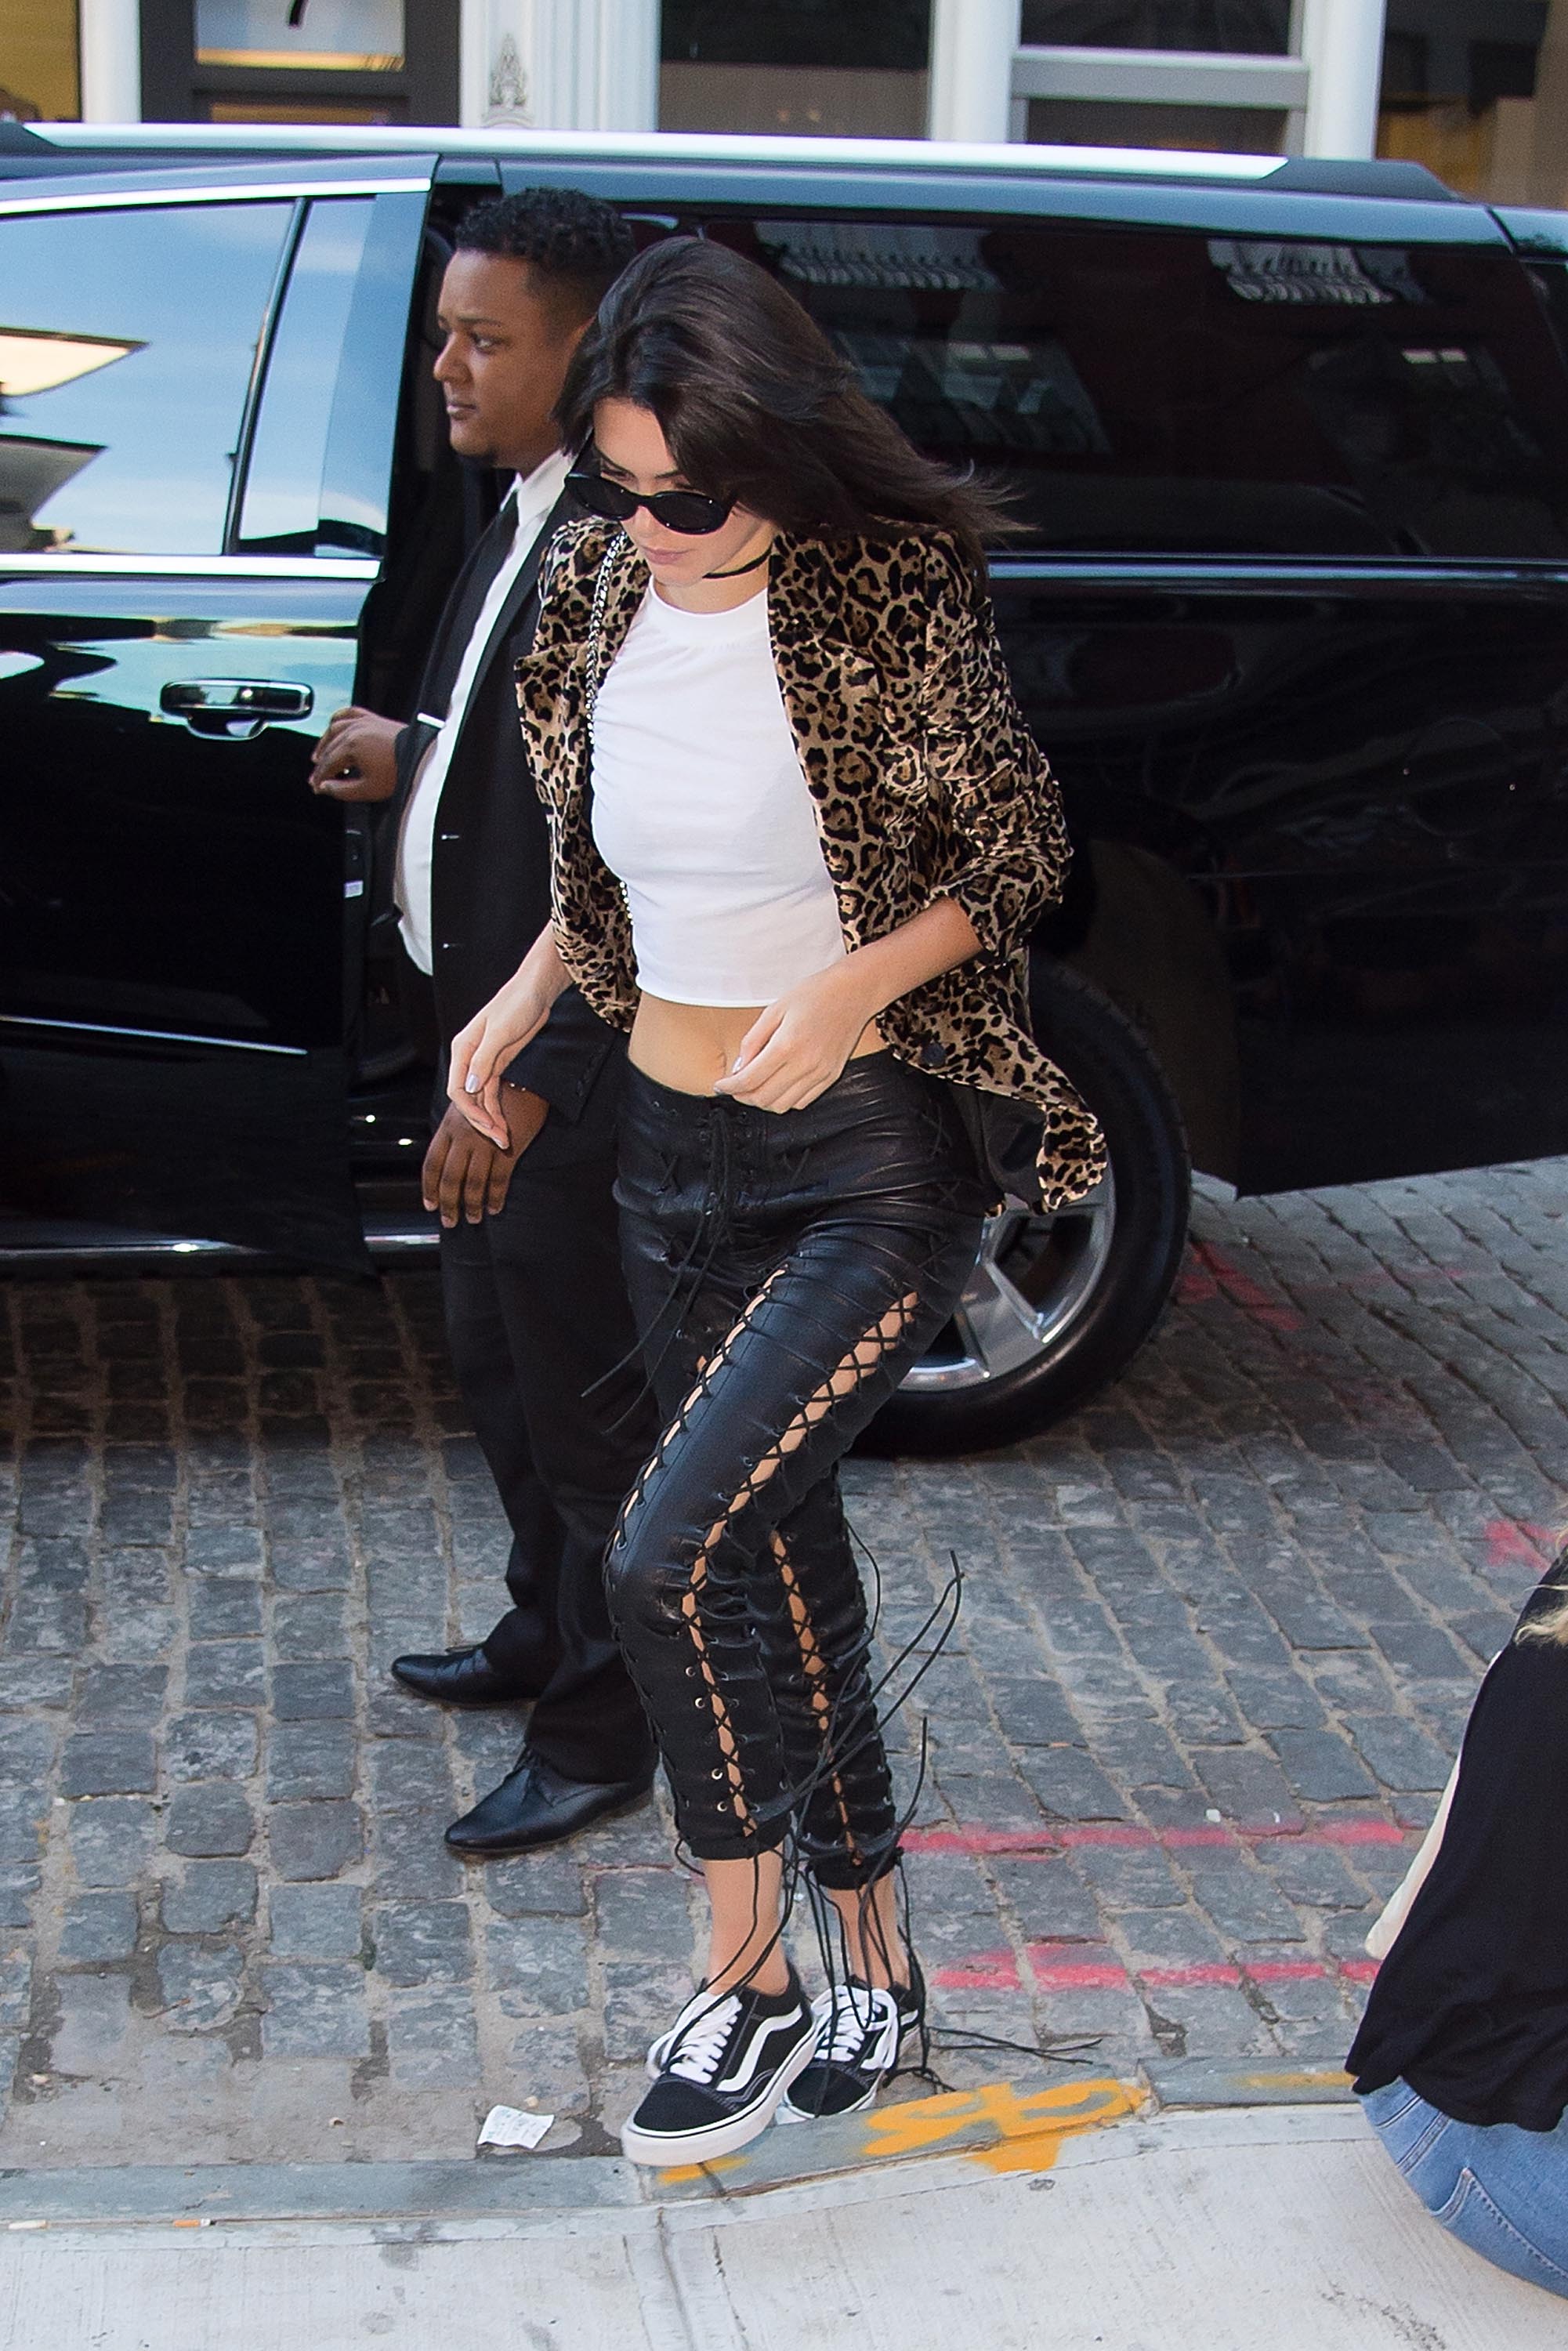 Kendall Jenner is seen in New York City